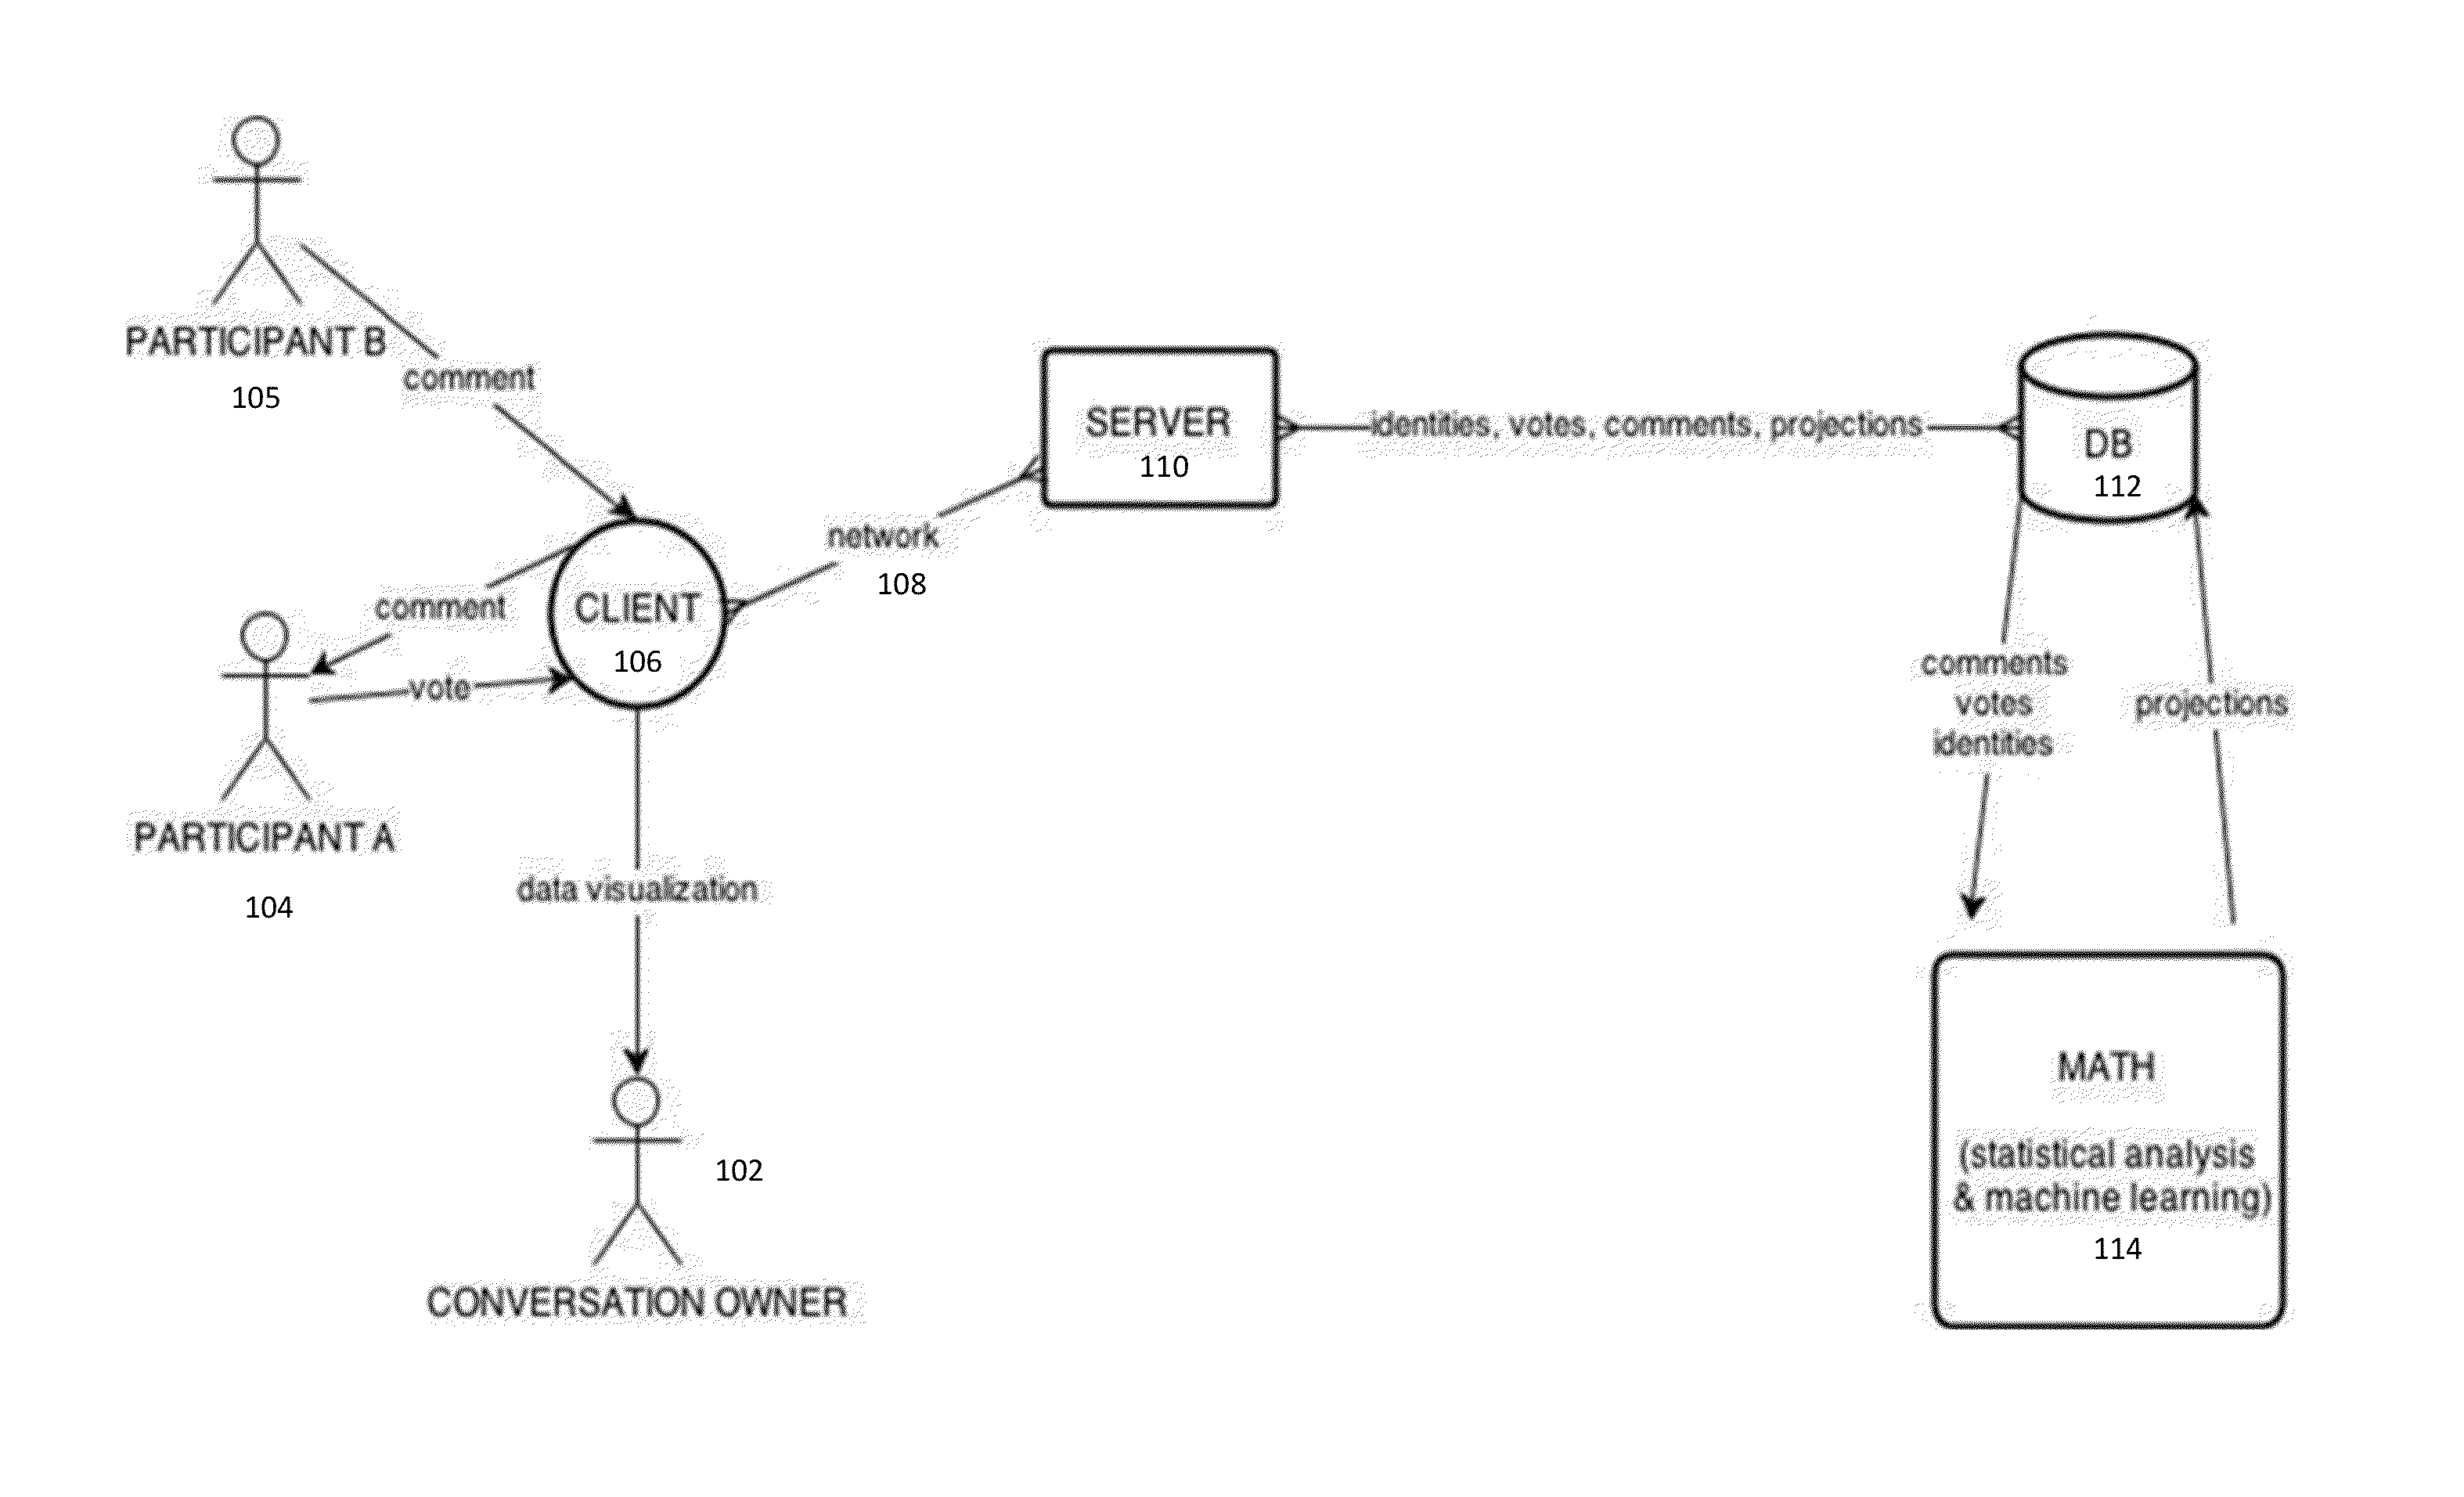 System and methods for real-time formation of groups and decentralized decision making